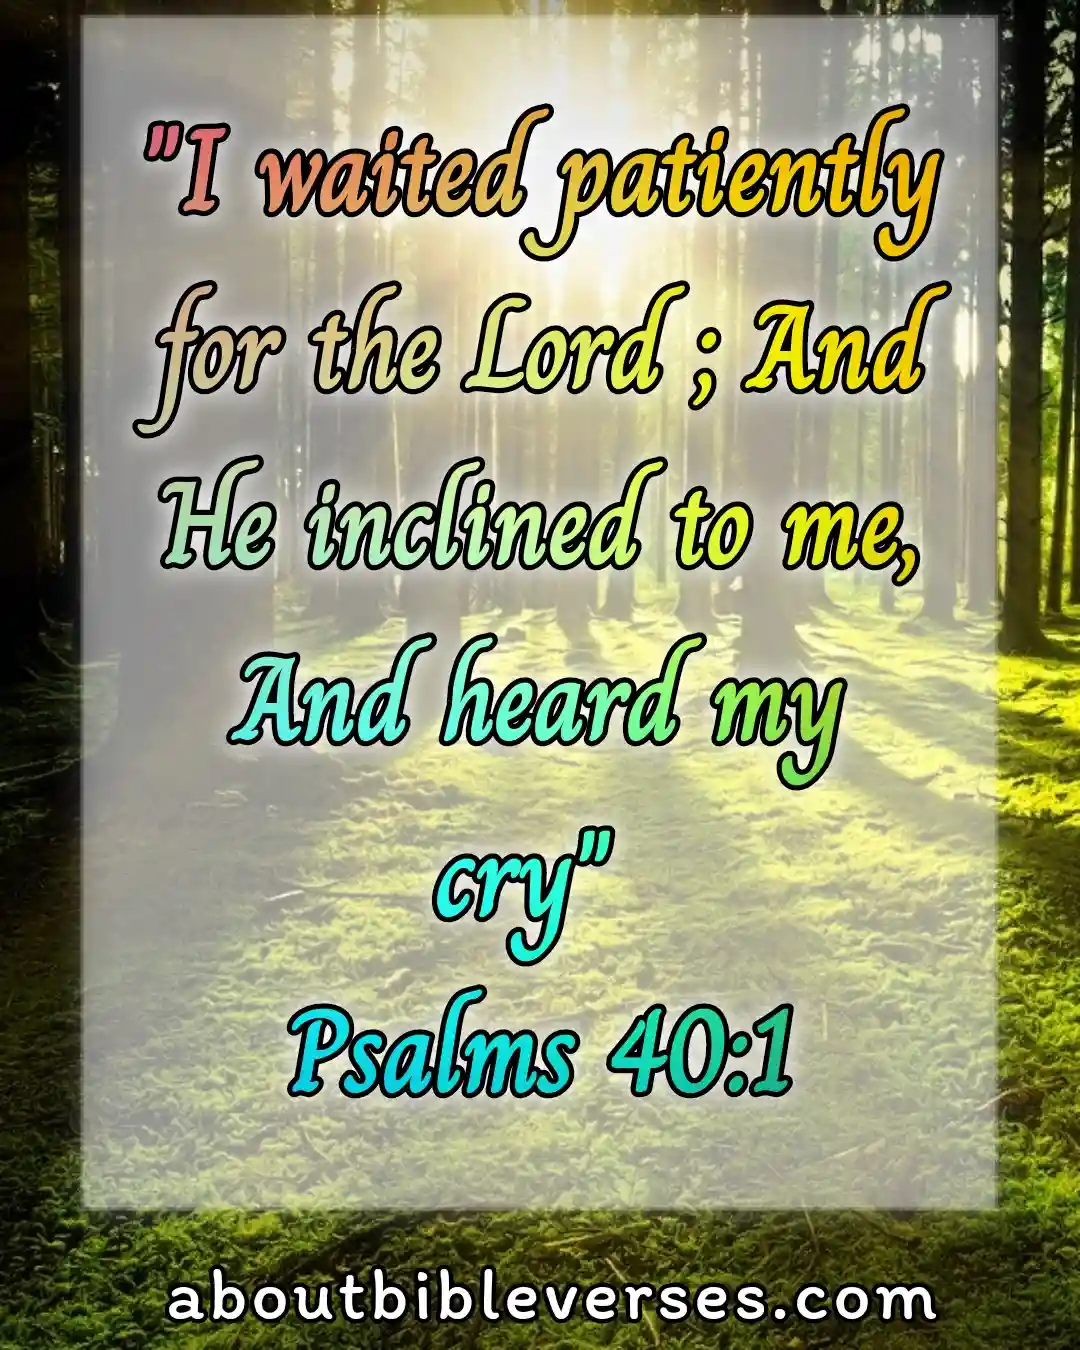 today bible verse (Psalm 40:1)